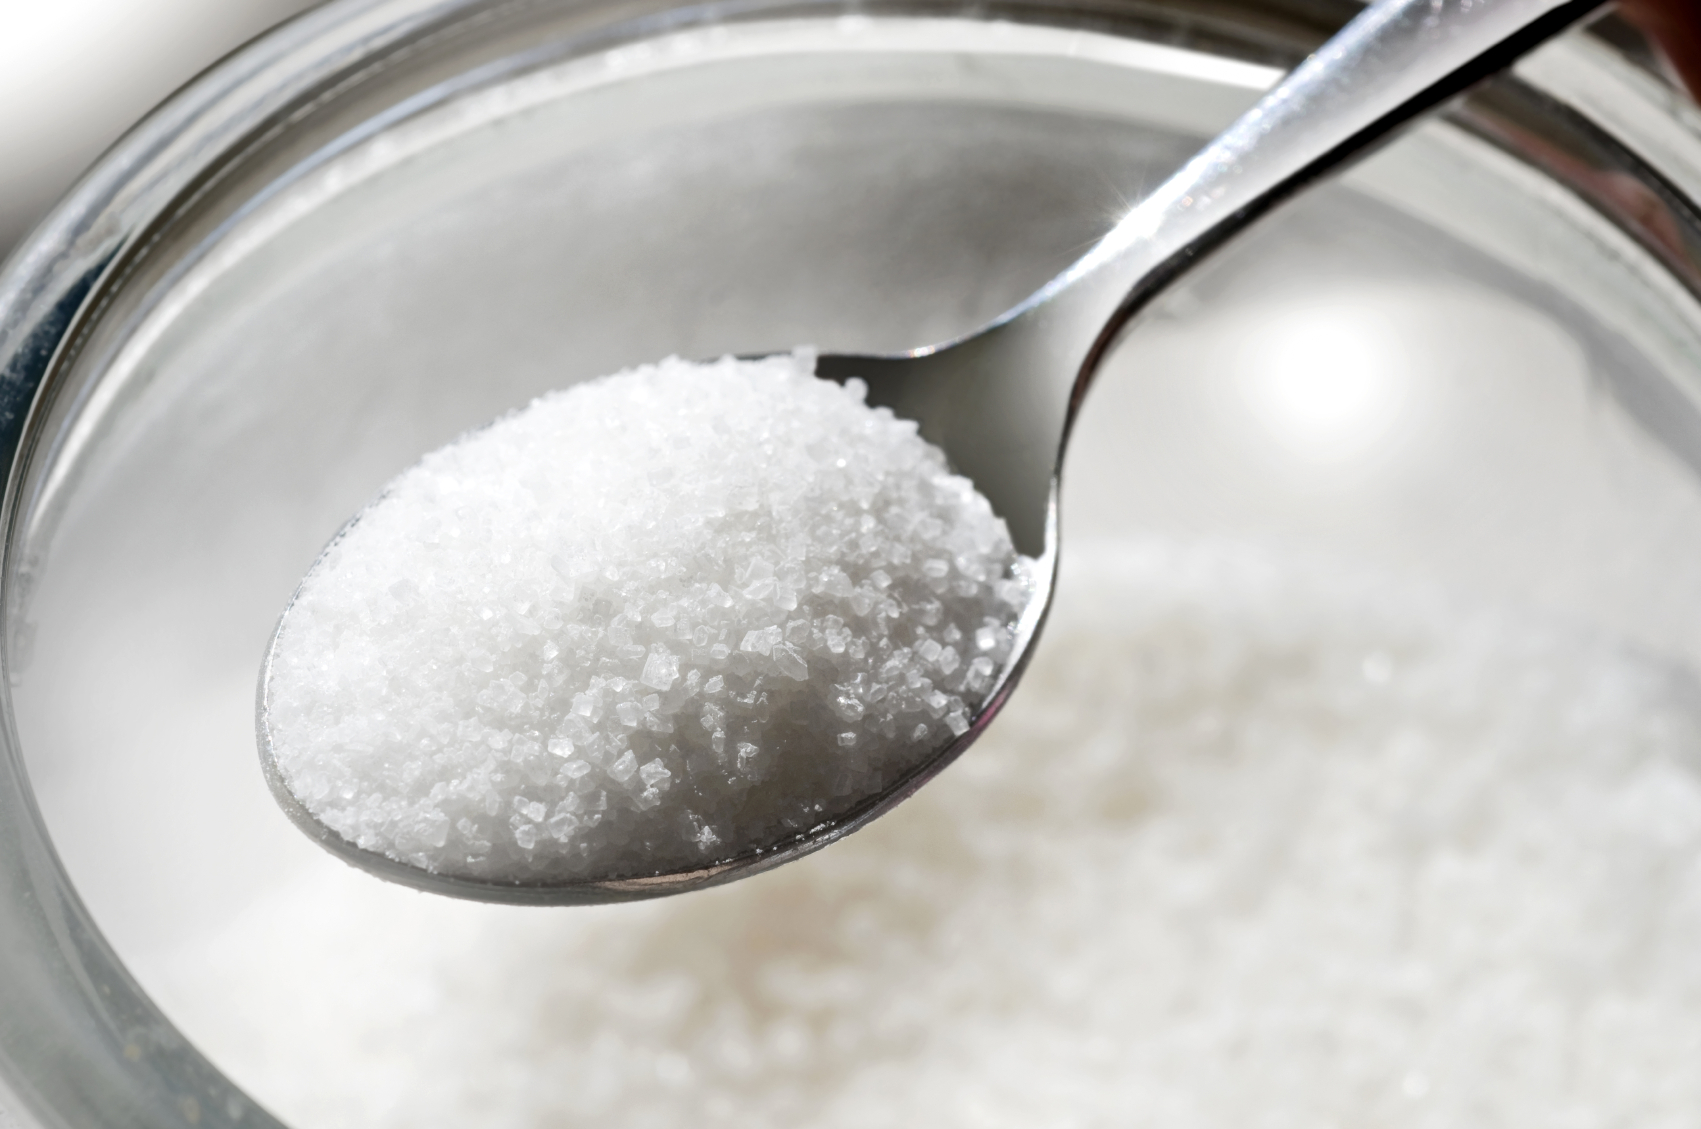 Christian Fitness - What is sugar alcohol?